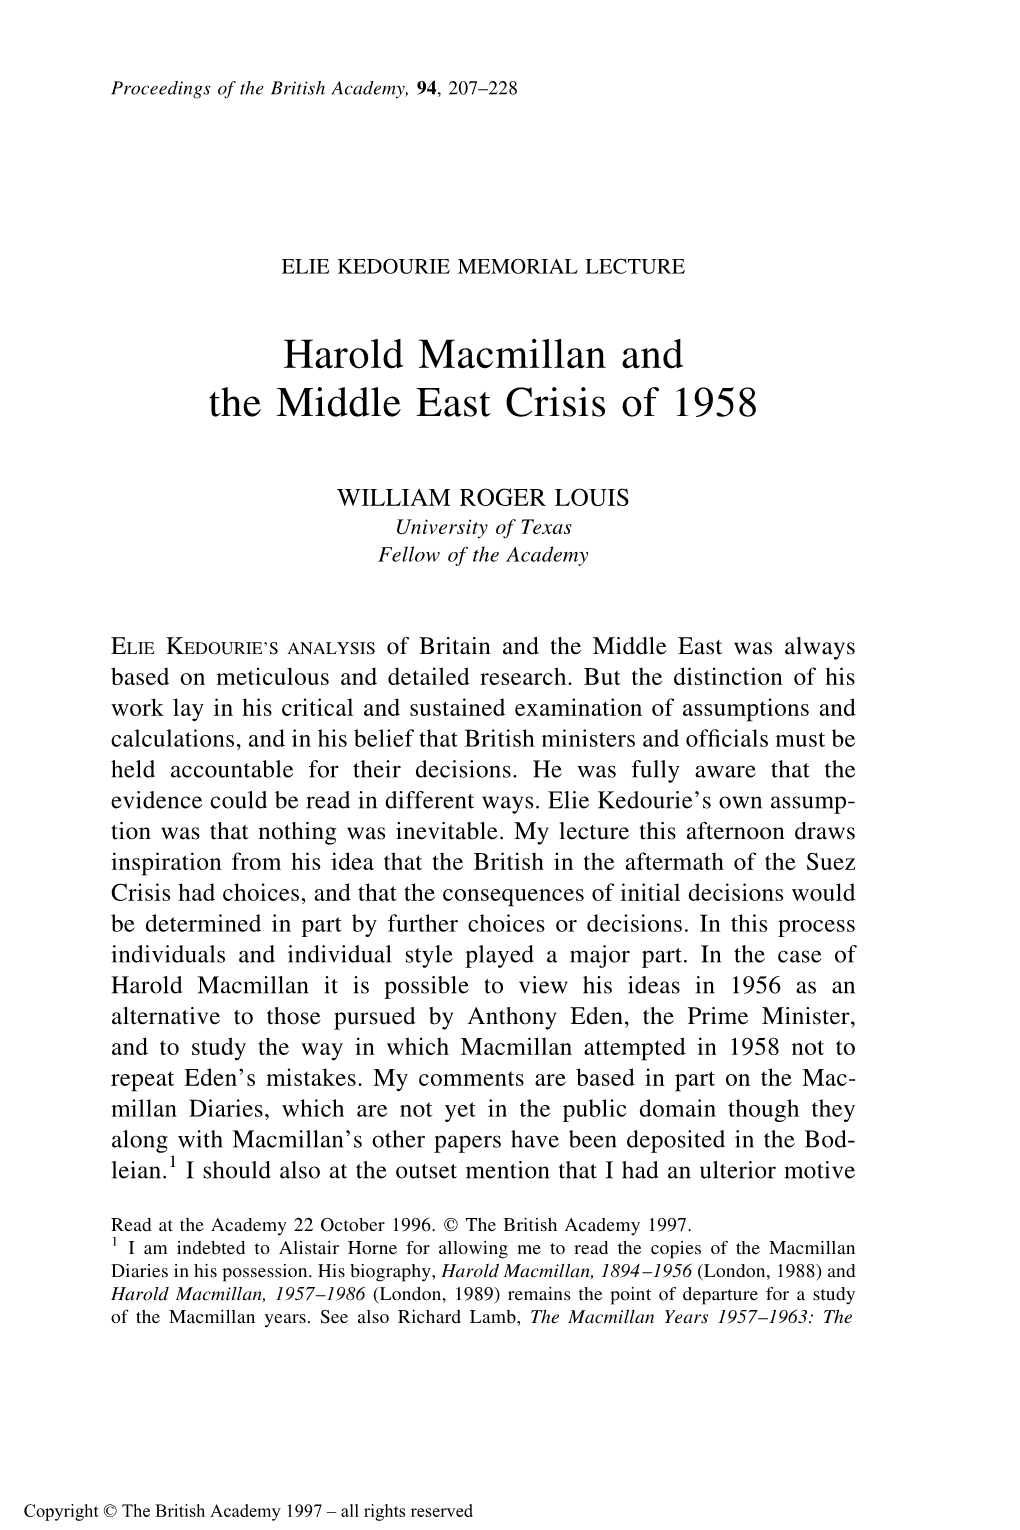 Harold Macmillan and the Middle East Crisis of 1958